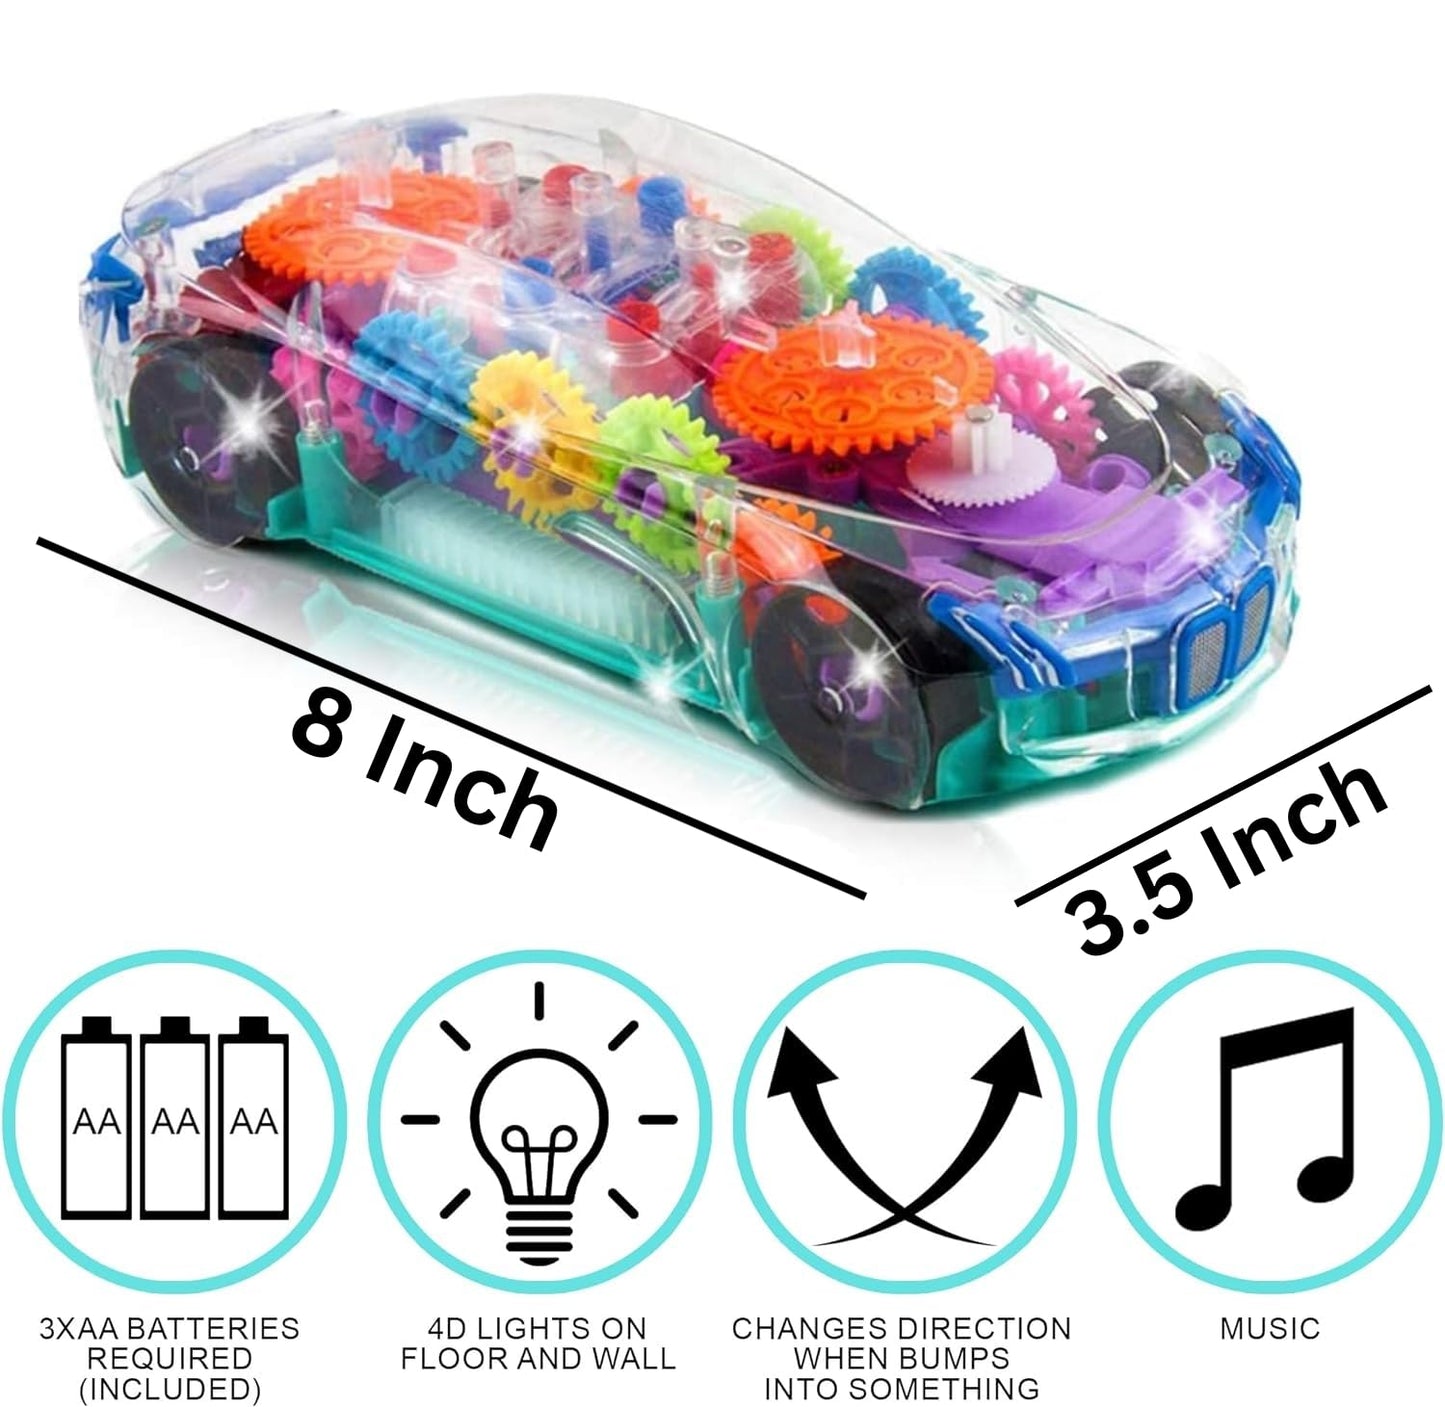 ArtCreativity Light Up Transparent Car Toy for Kids, 1PC, Bump and Go Toy Car with Colorful Moving Gears, Music, and LED Effects, Fun Educational Toy for Kids, Great Birthday Gift Idea